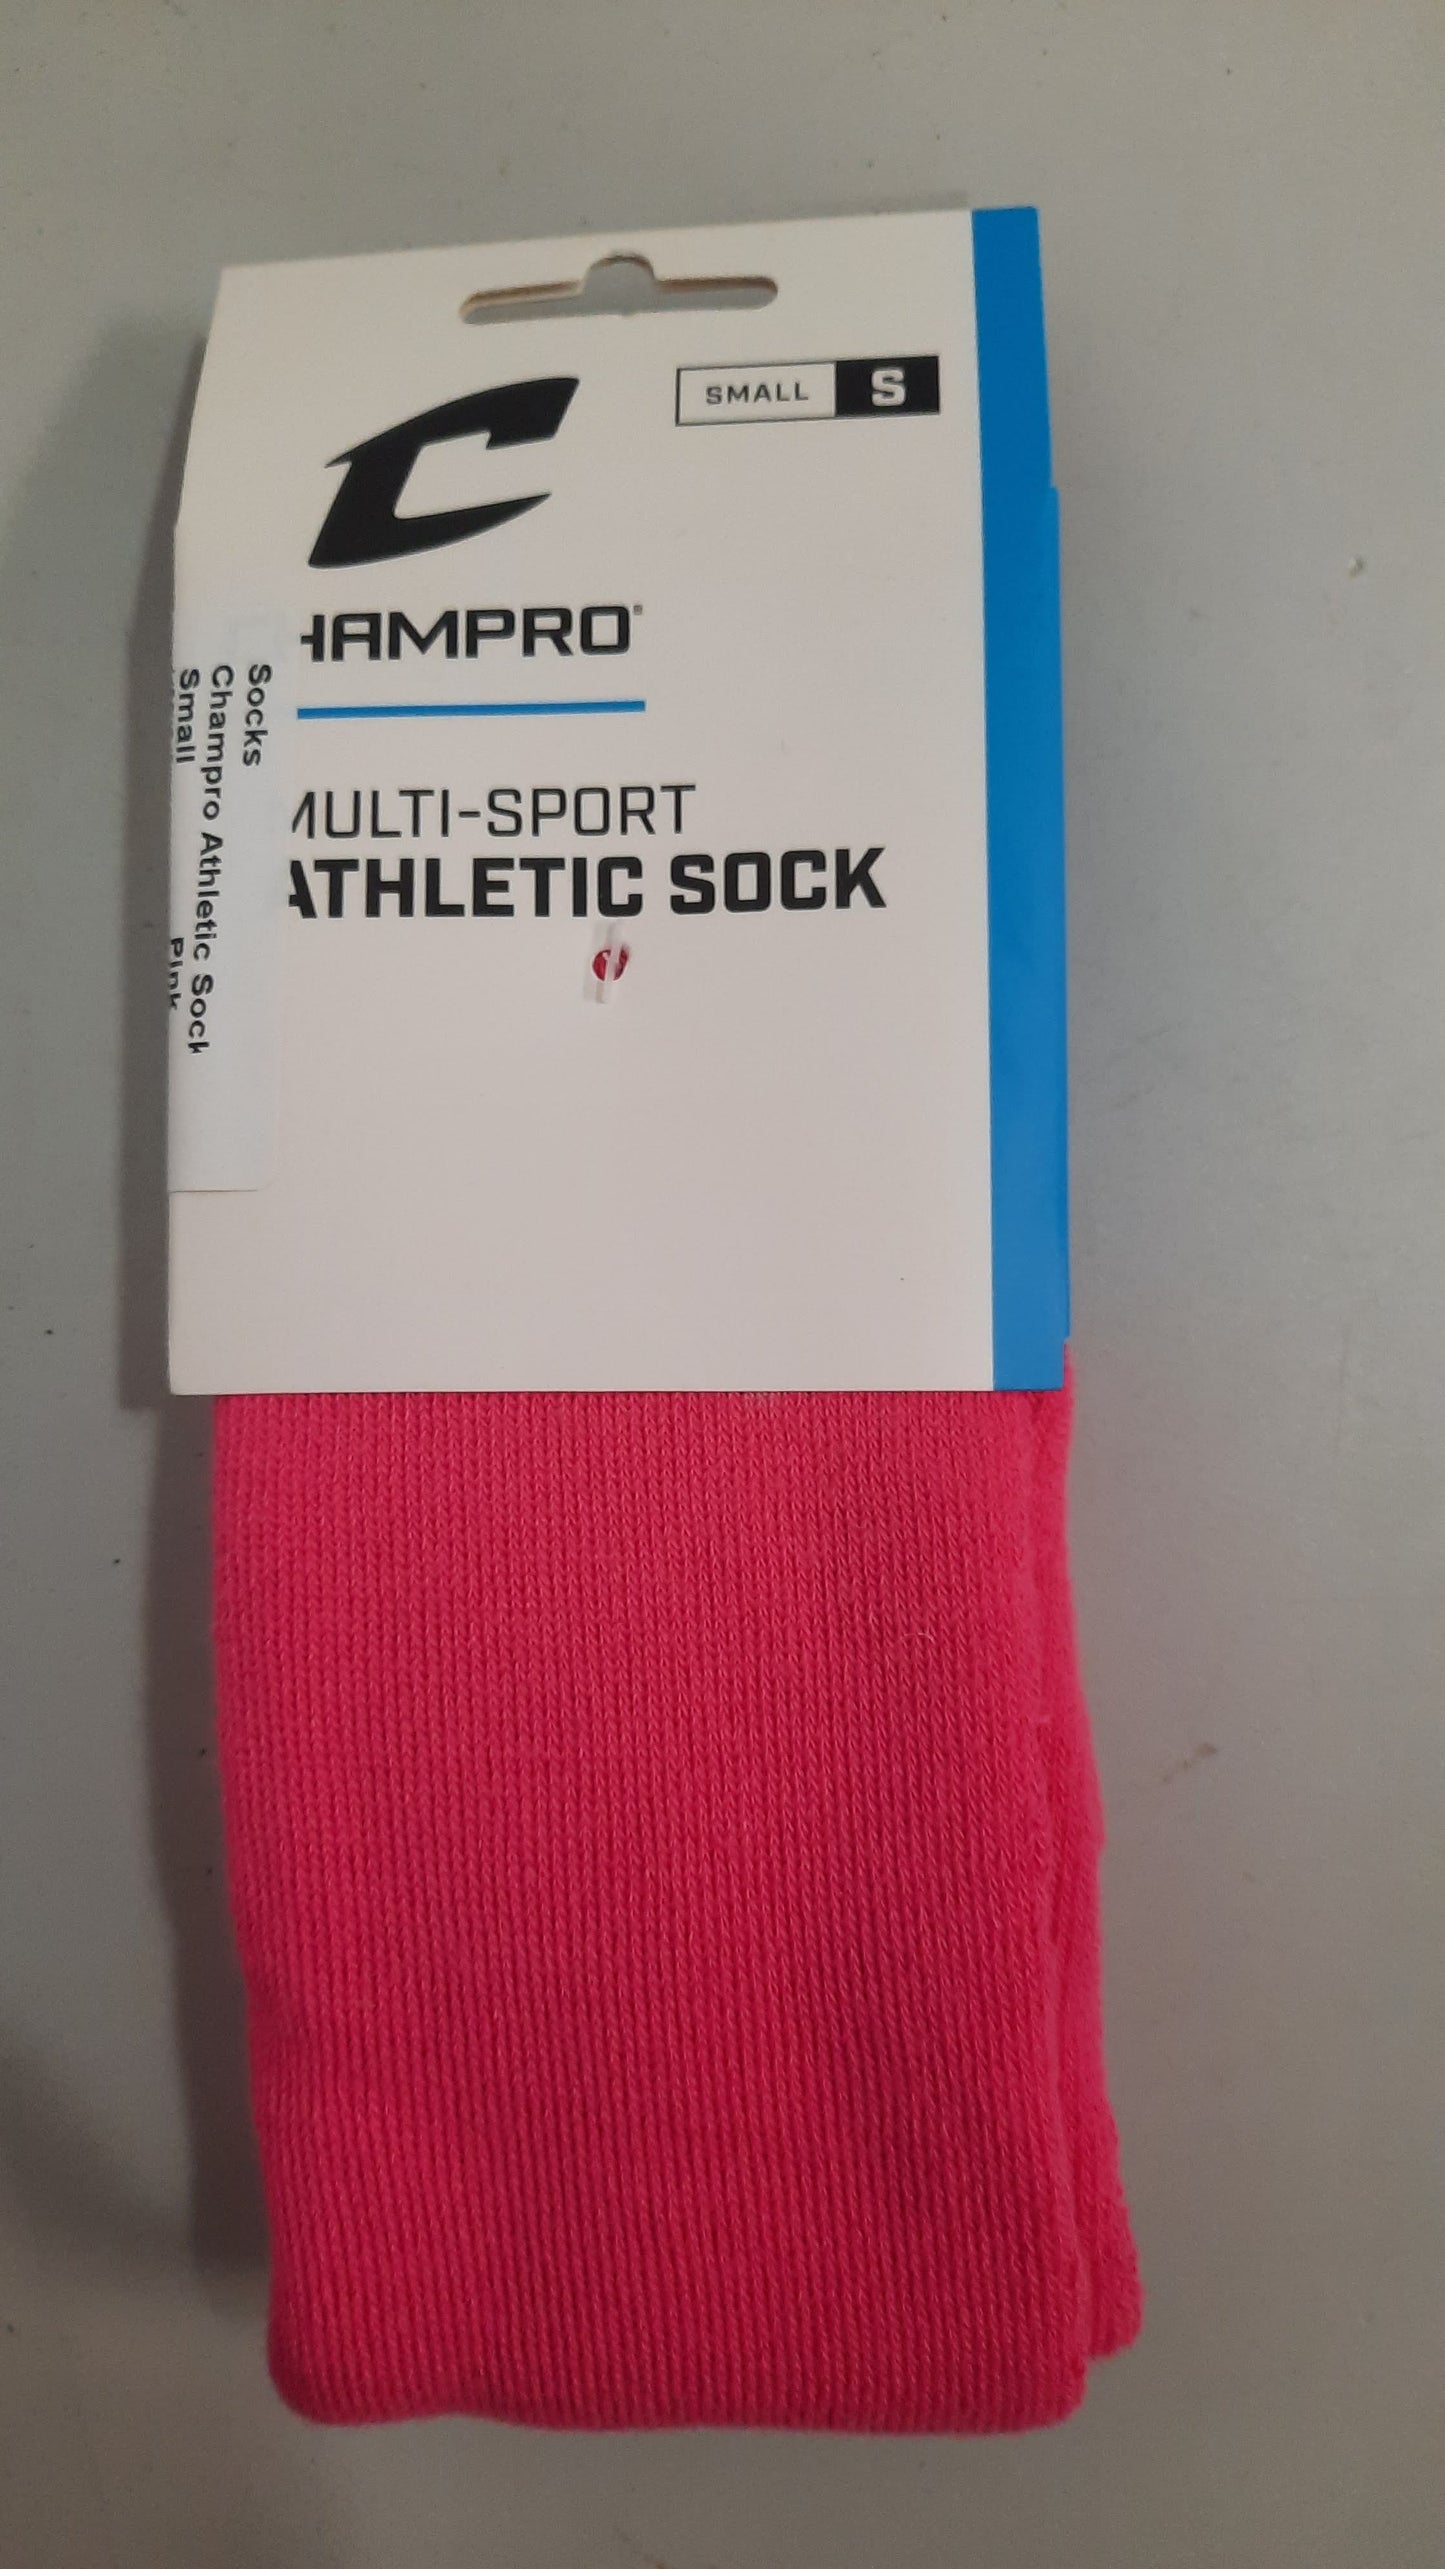 Champro Athletic Socks Size Small Color Pink Multi-Sport Condition New